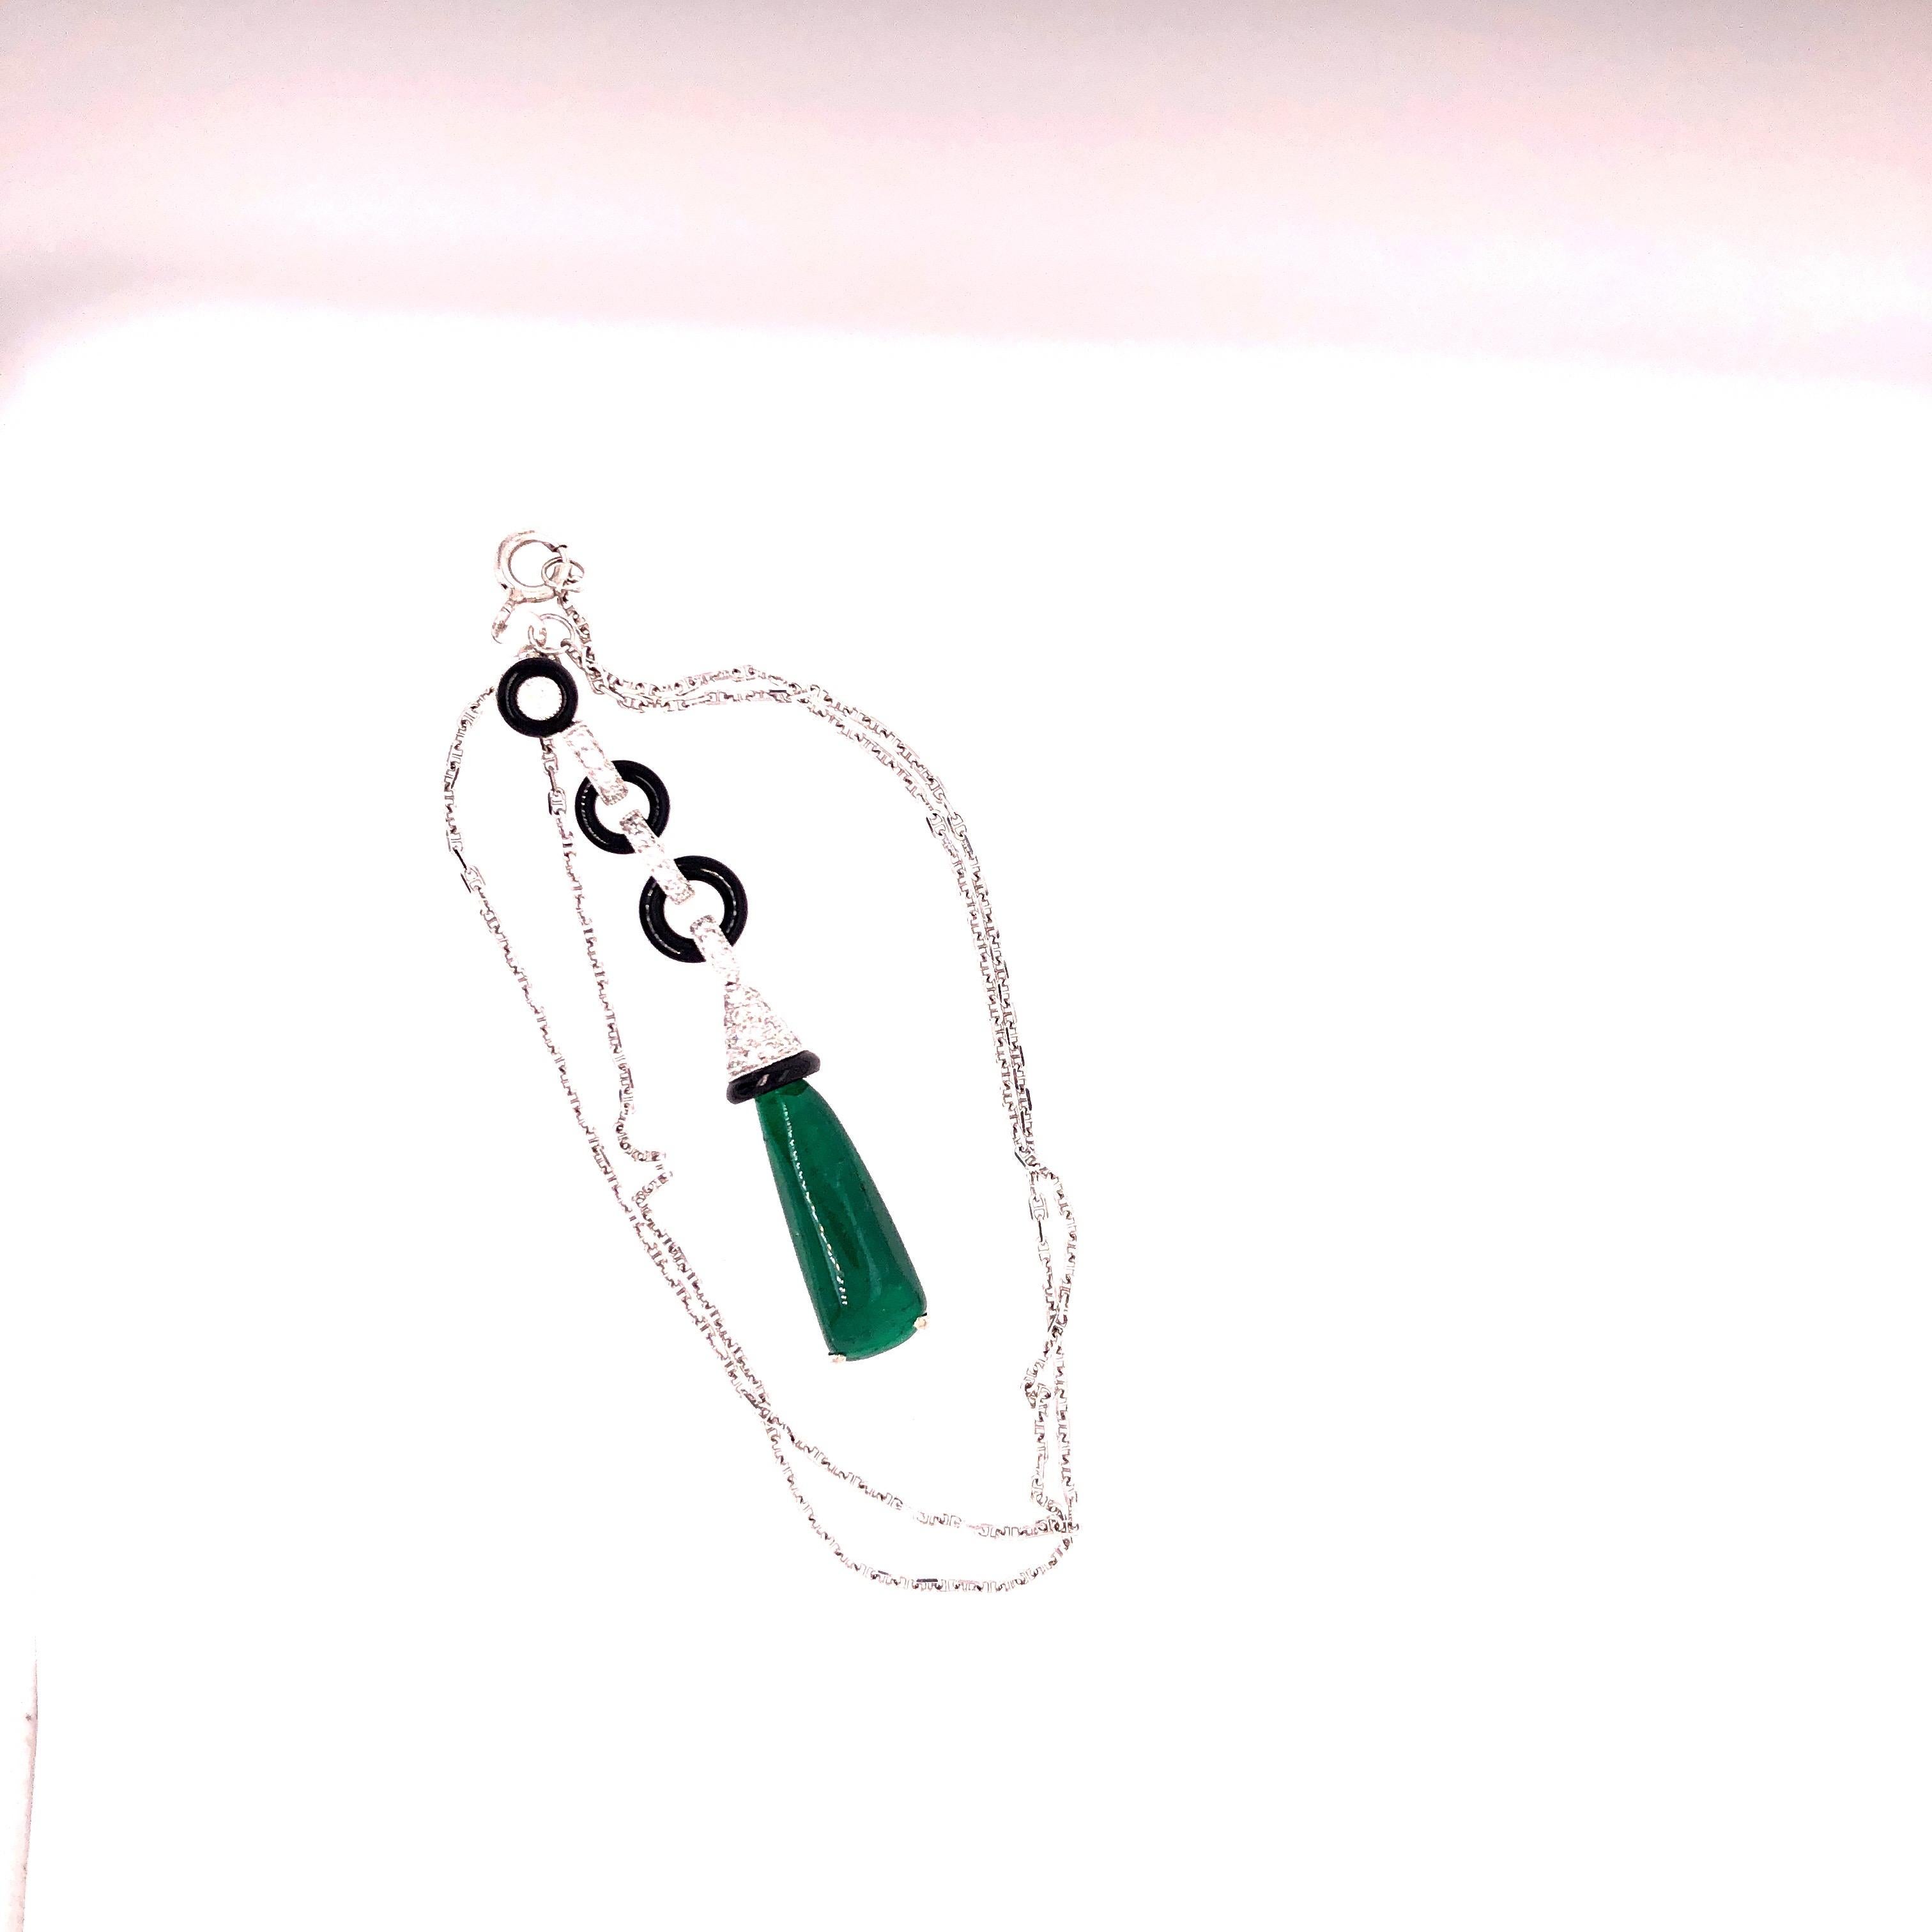 Fabulous Classic White Gold Cabochon Emerald and Onyx Pendant on white gold chain which is stamped 750 and Italy.  Pendant Stamped FREI and 750.  